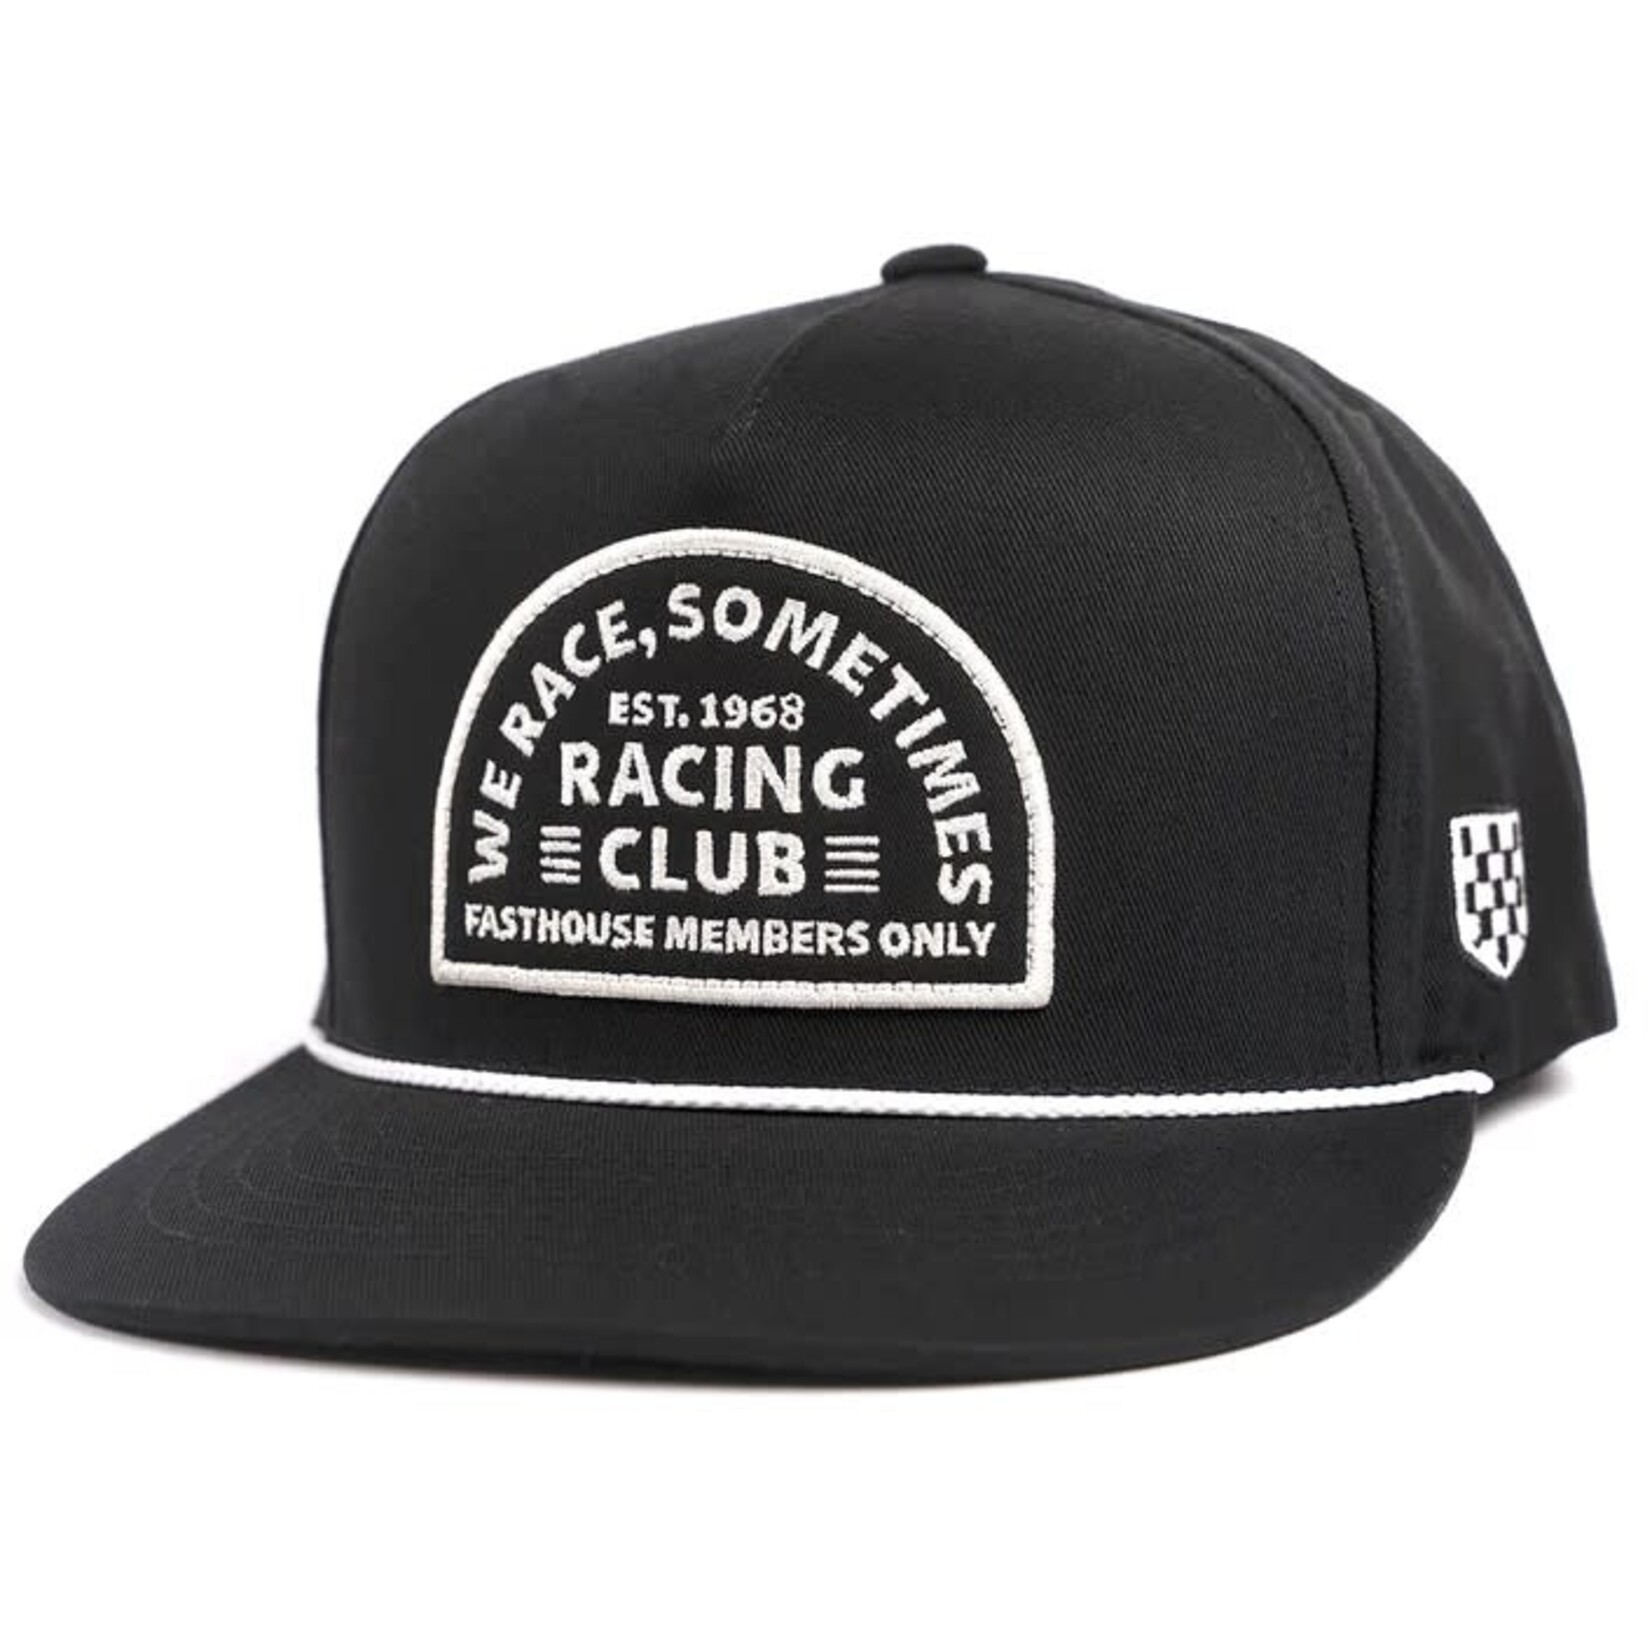 FASTHOUSE MEMBERS ONLY HAT, BLACK (OS)